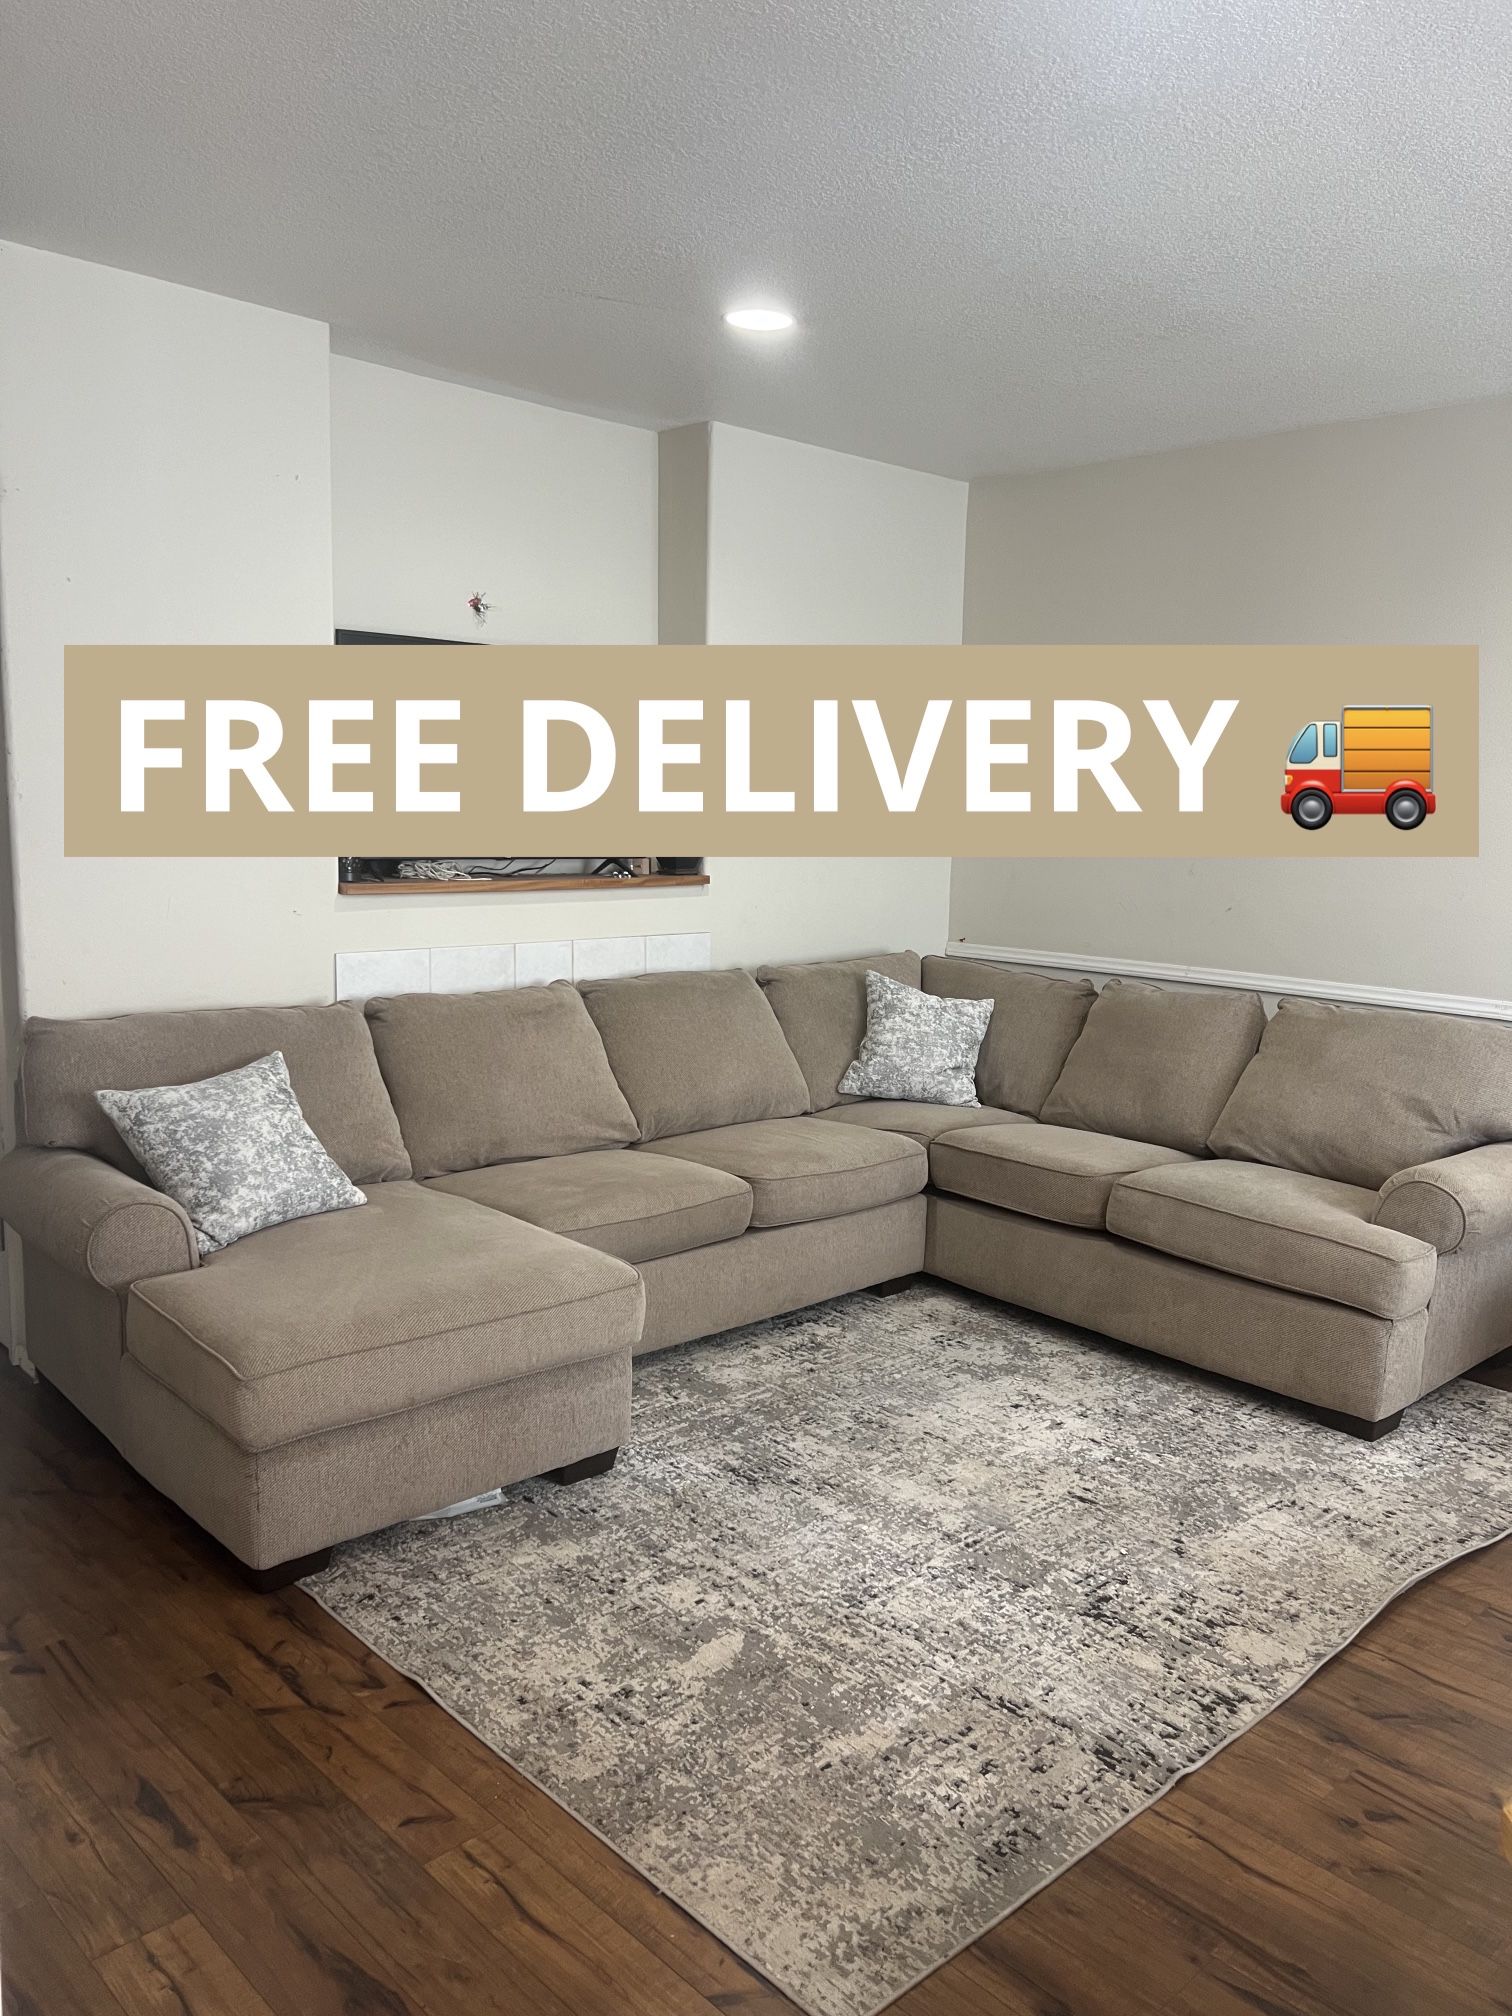 Large Tan Sectional Couch 🛋️- FREE DELIVERY 🚚 